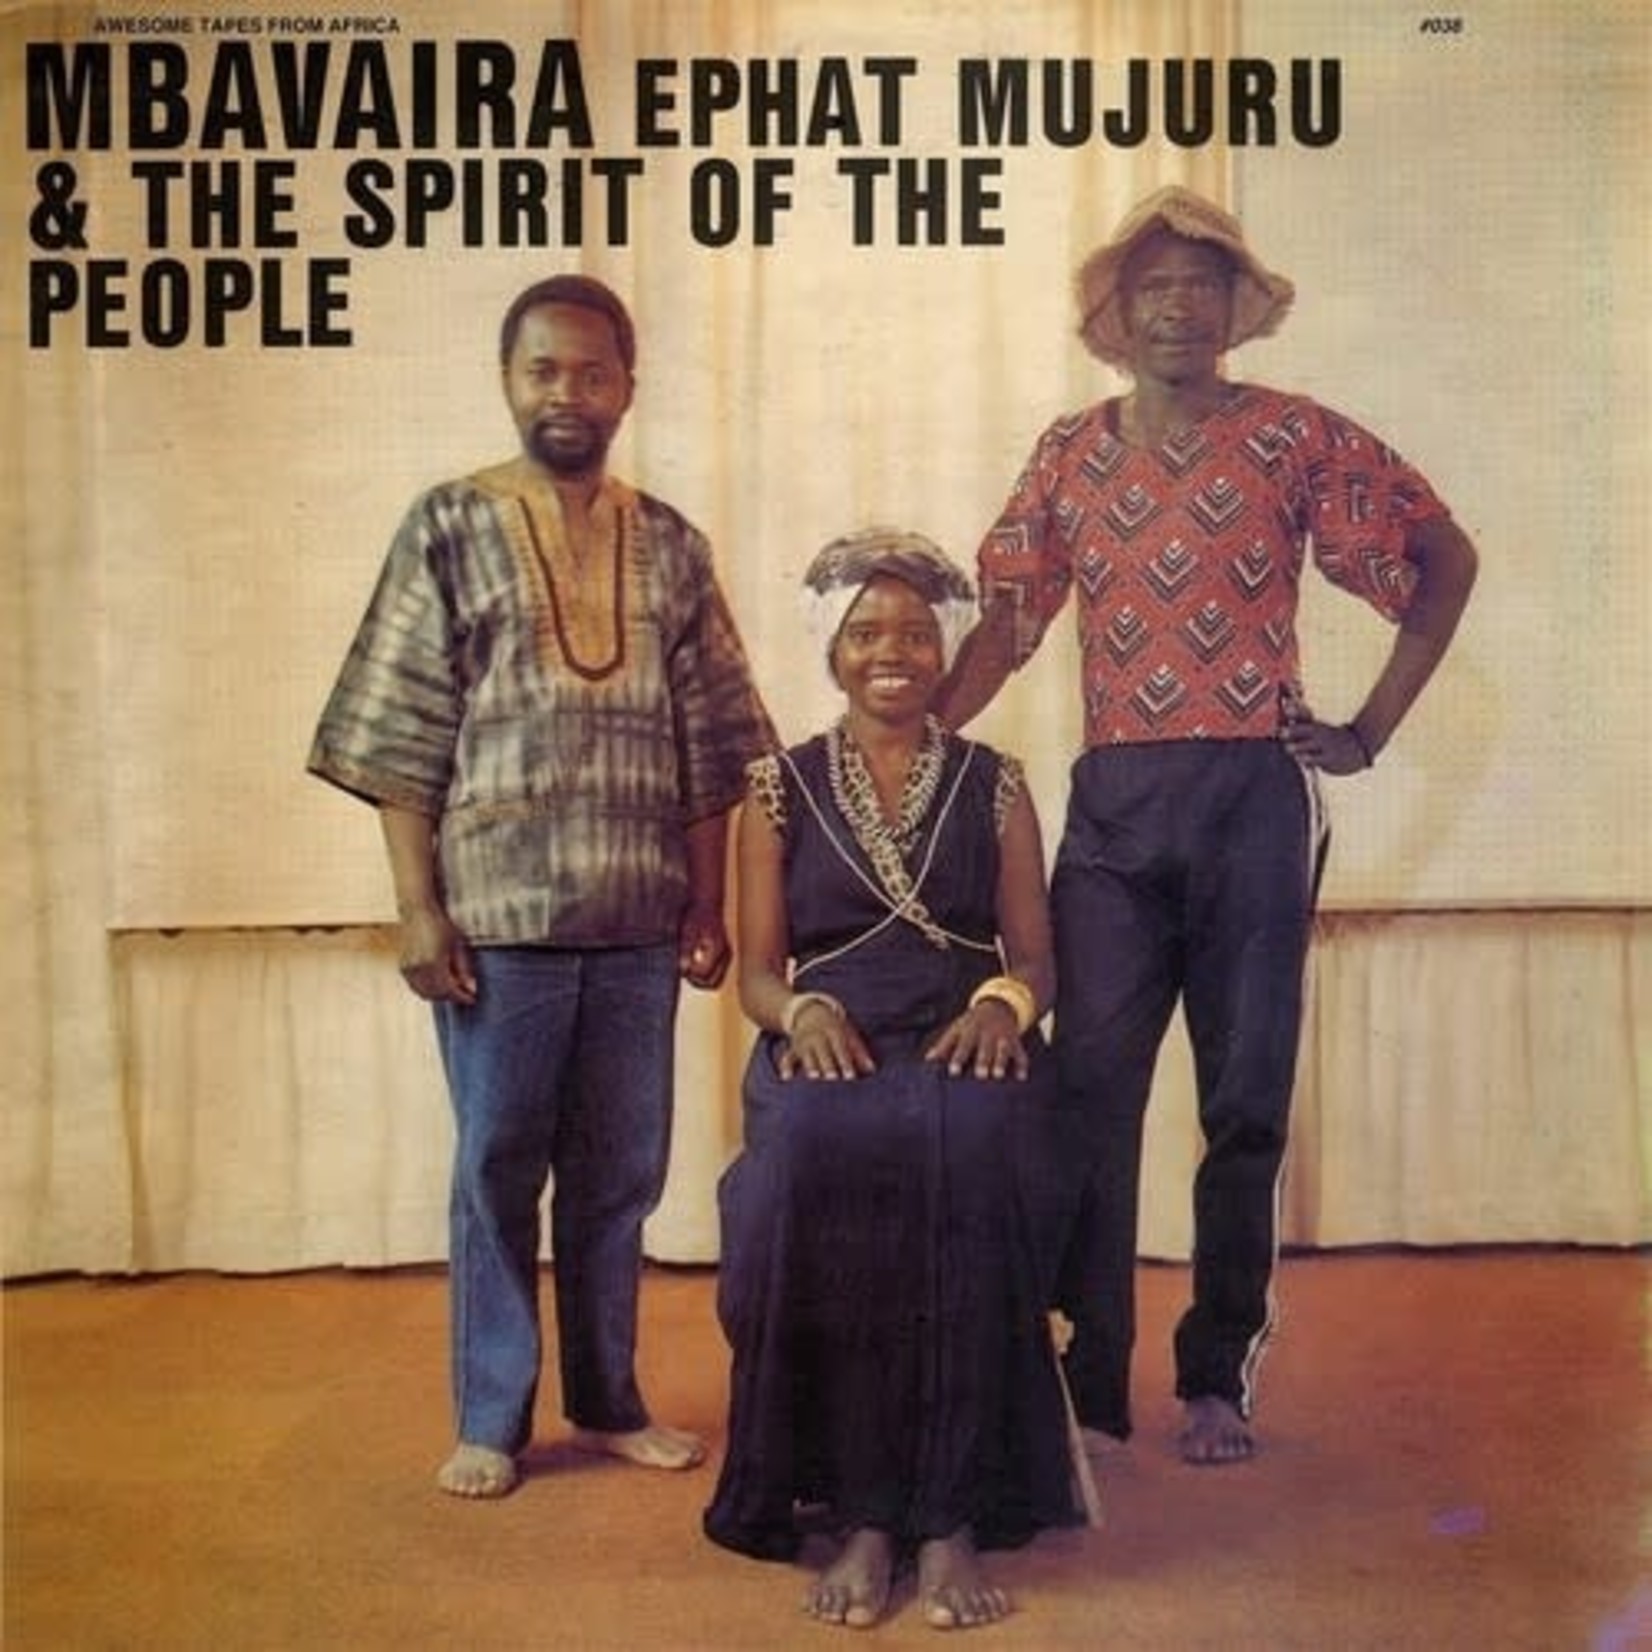 Awesome Tapes From Africa Ephat Mujuru & The Spirit of the People - Mbavaira (LP)